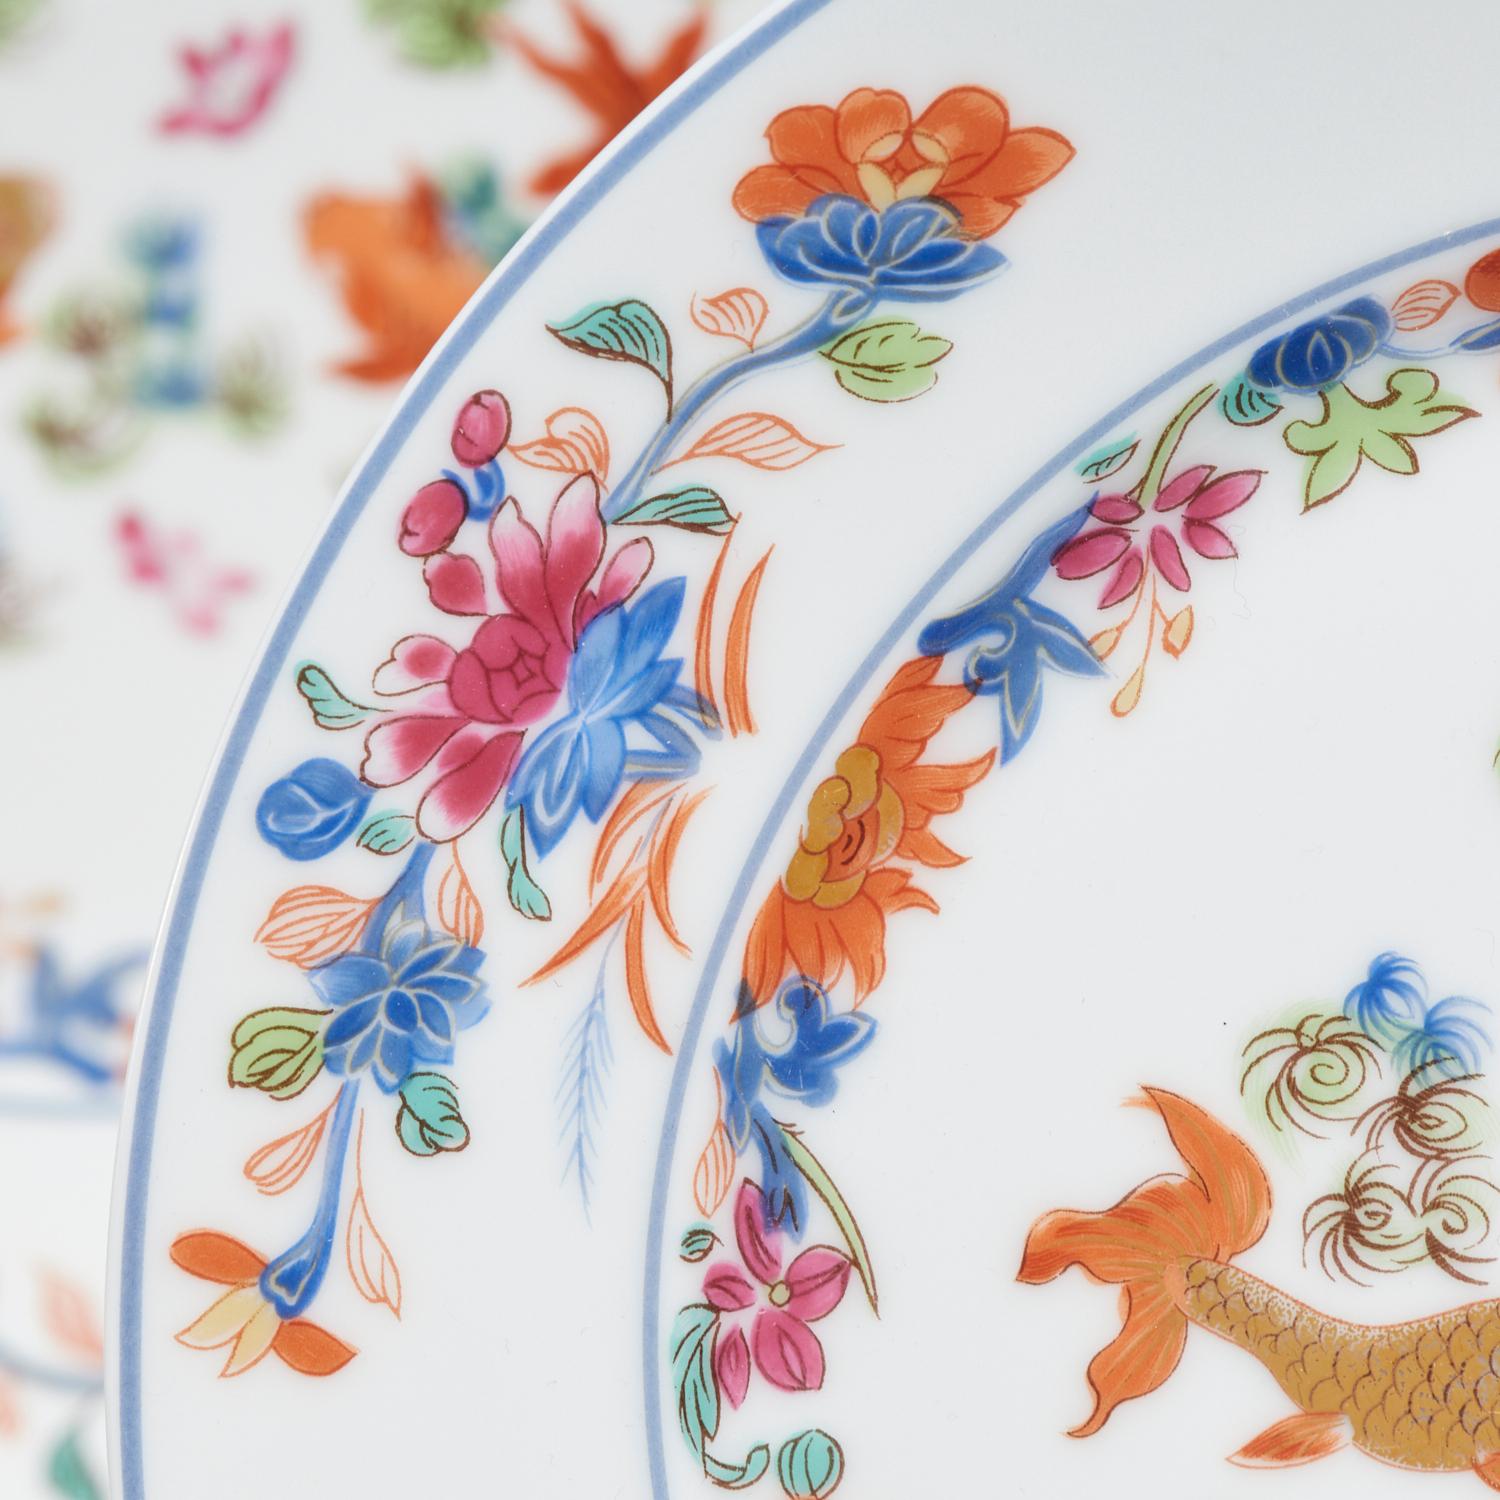 Chinoiserie 133 Piece House of Puiforcat Kiang She Dinner Service for 12 by Limoges, France For Sale